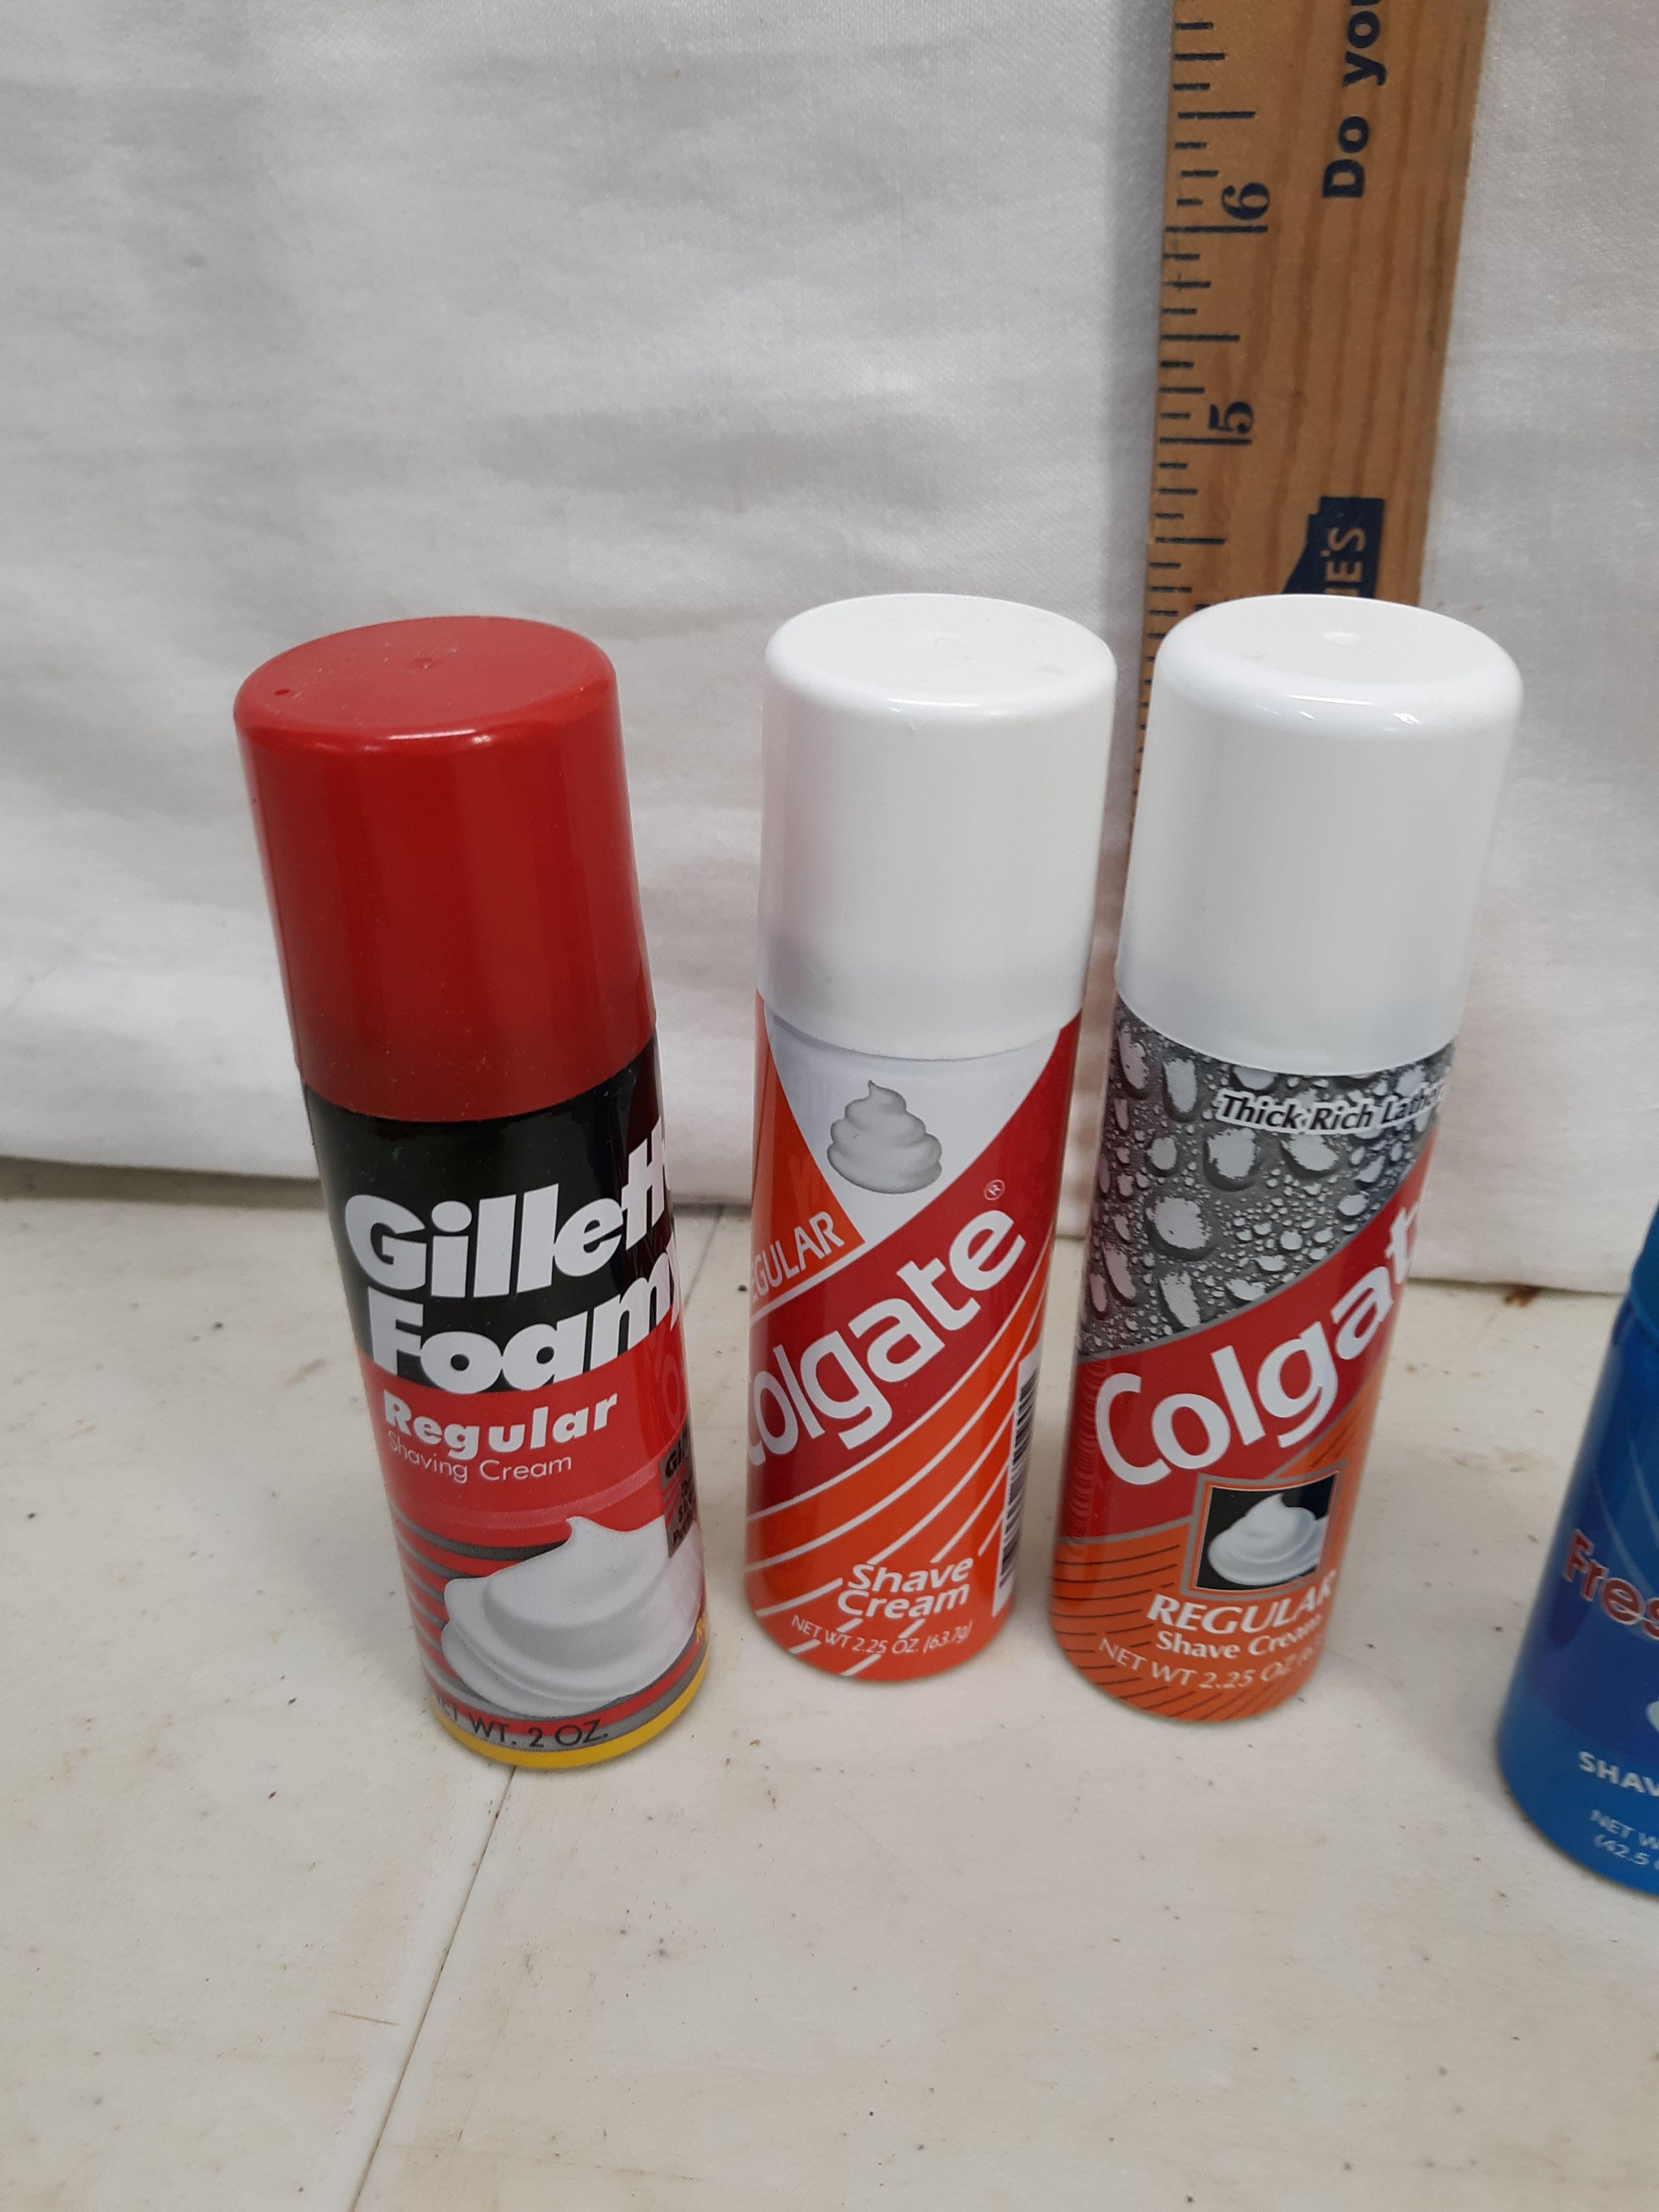 New 7 travel cans of shaving cream, assorted brands